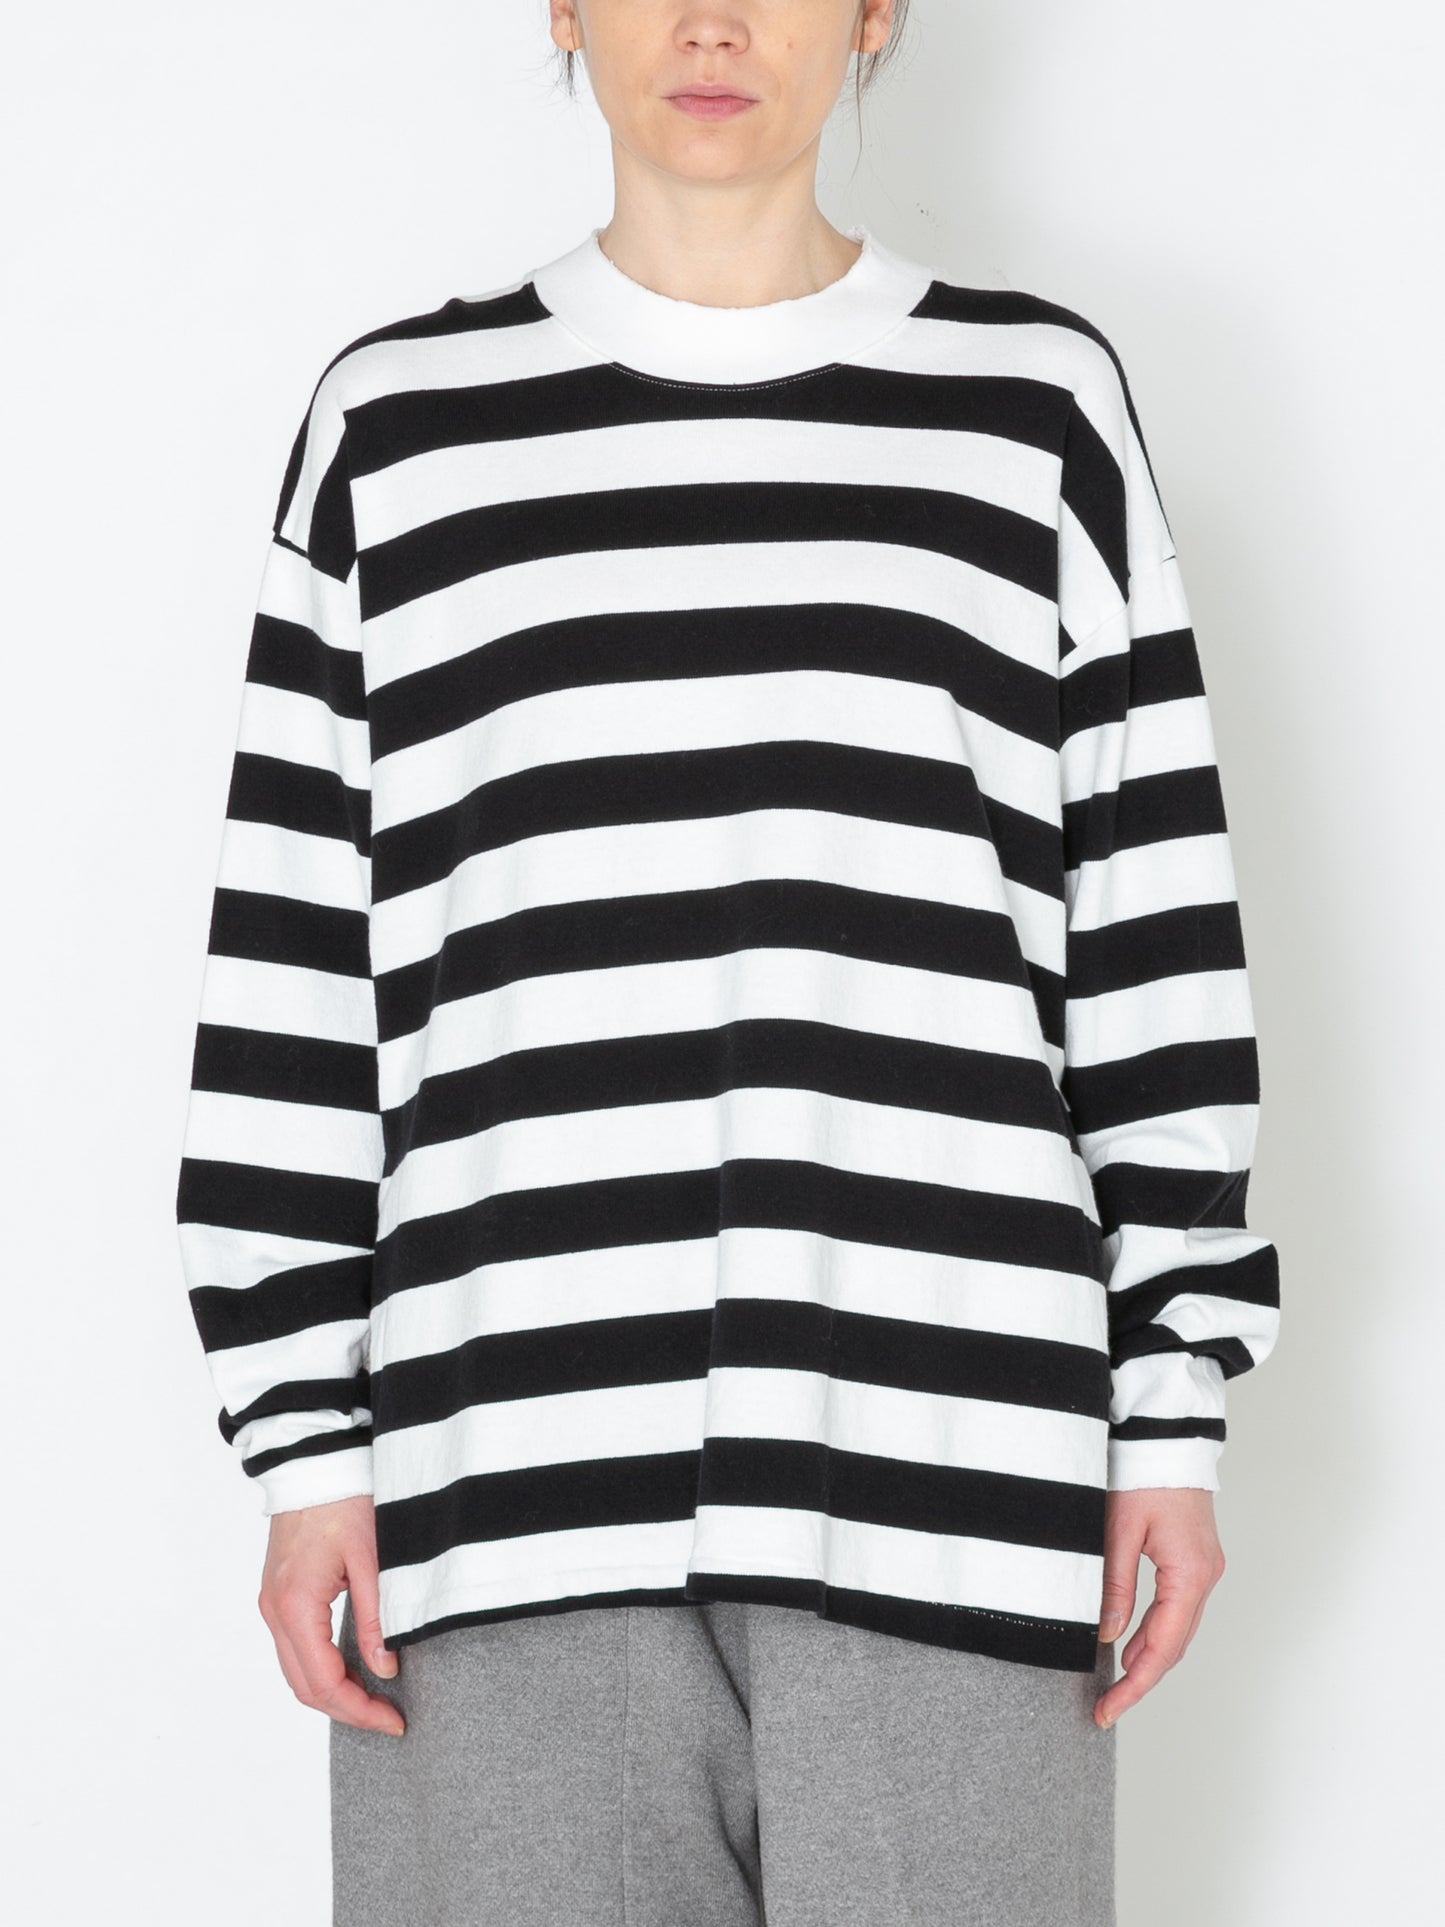 BAGGY L/S TEE COTTON BORDER JERSEY AM-C0104 O.White